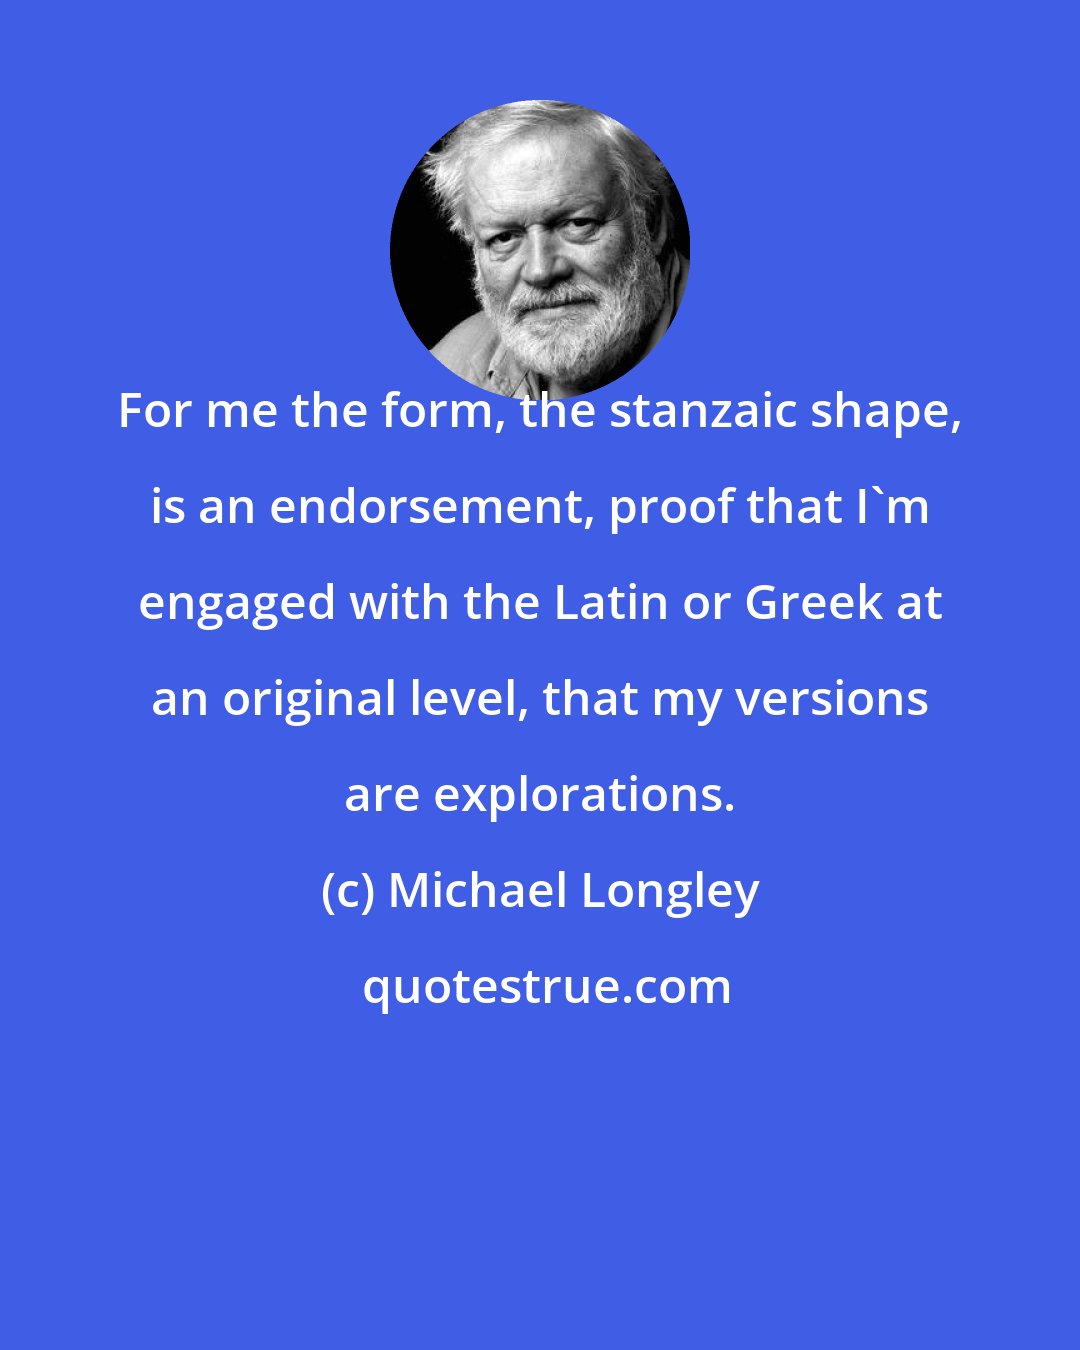 Michael Longley: For me the form, the stanzaic shape, is an endorsement, proof that I'm engaged with the Latin or Greek at an original level, that my versions are explorations.